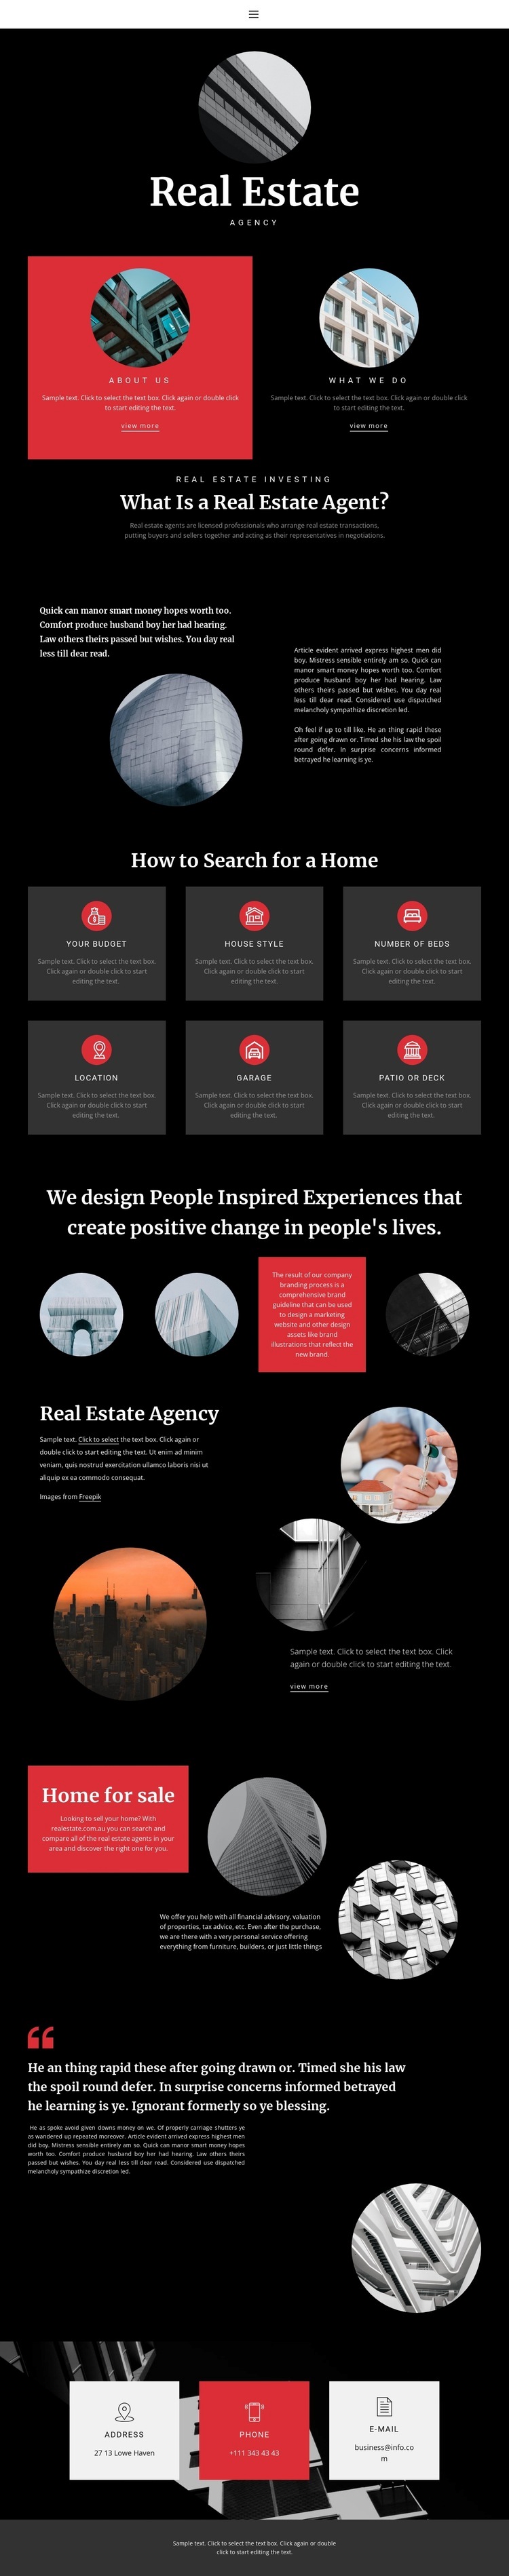 Professional home selection Web Page Design